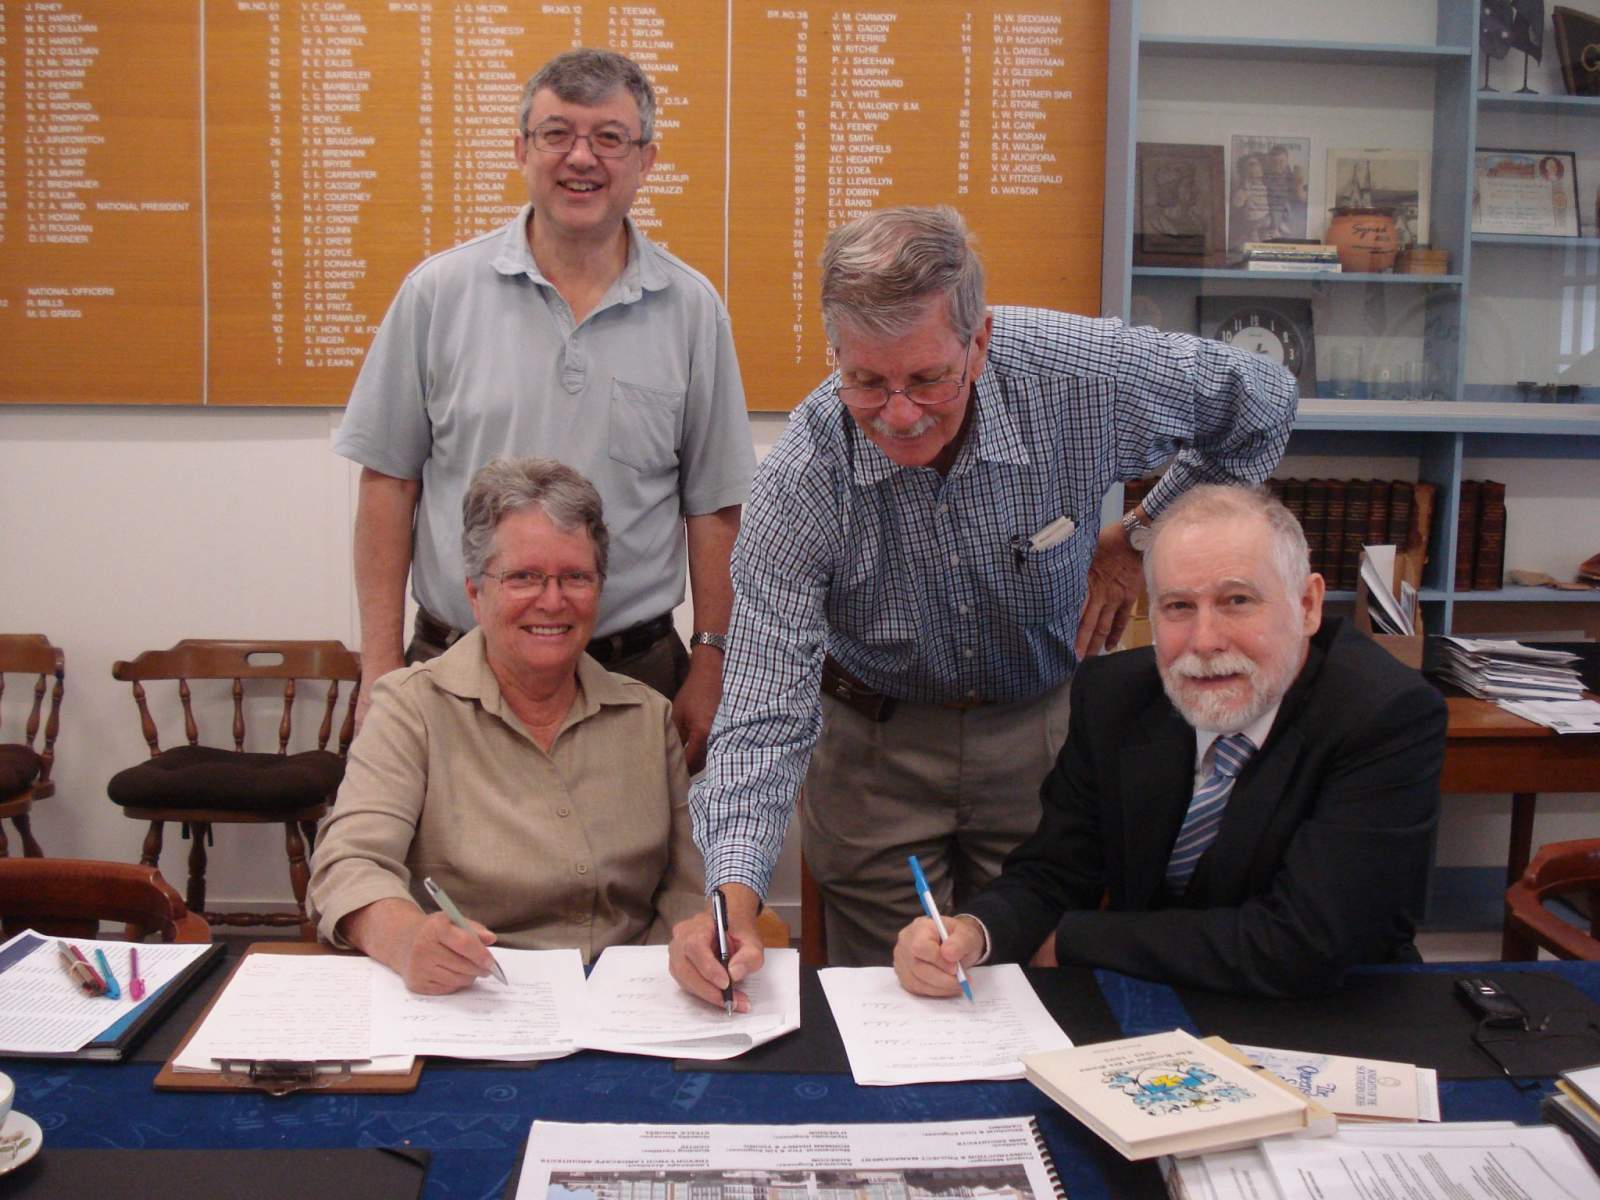 Signing the KSCQ Contract, October 2013